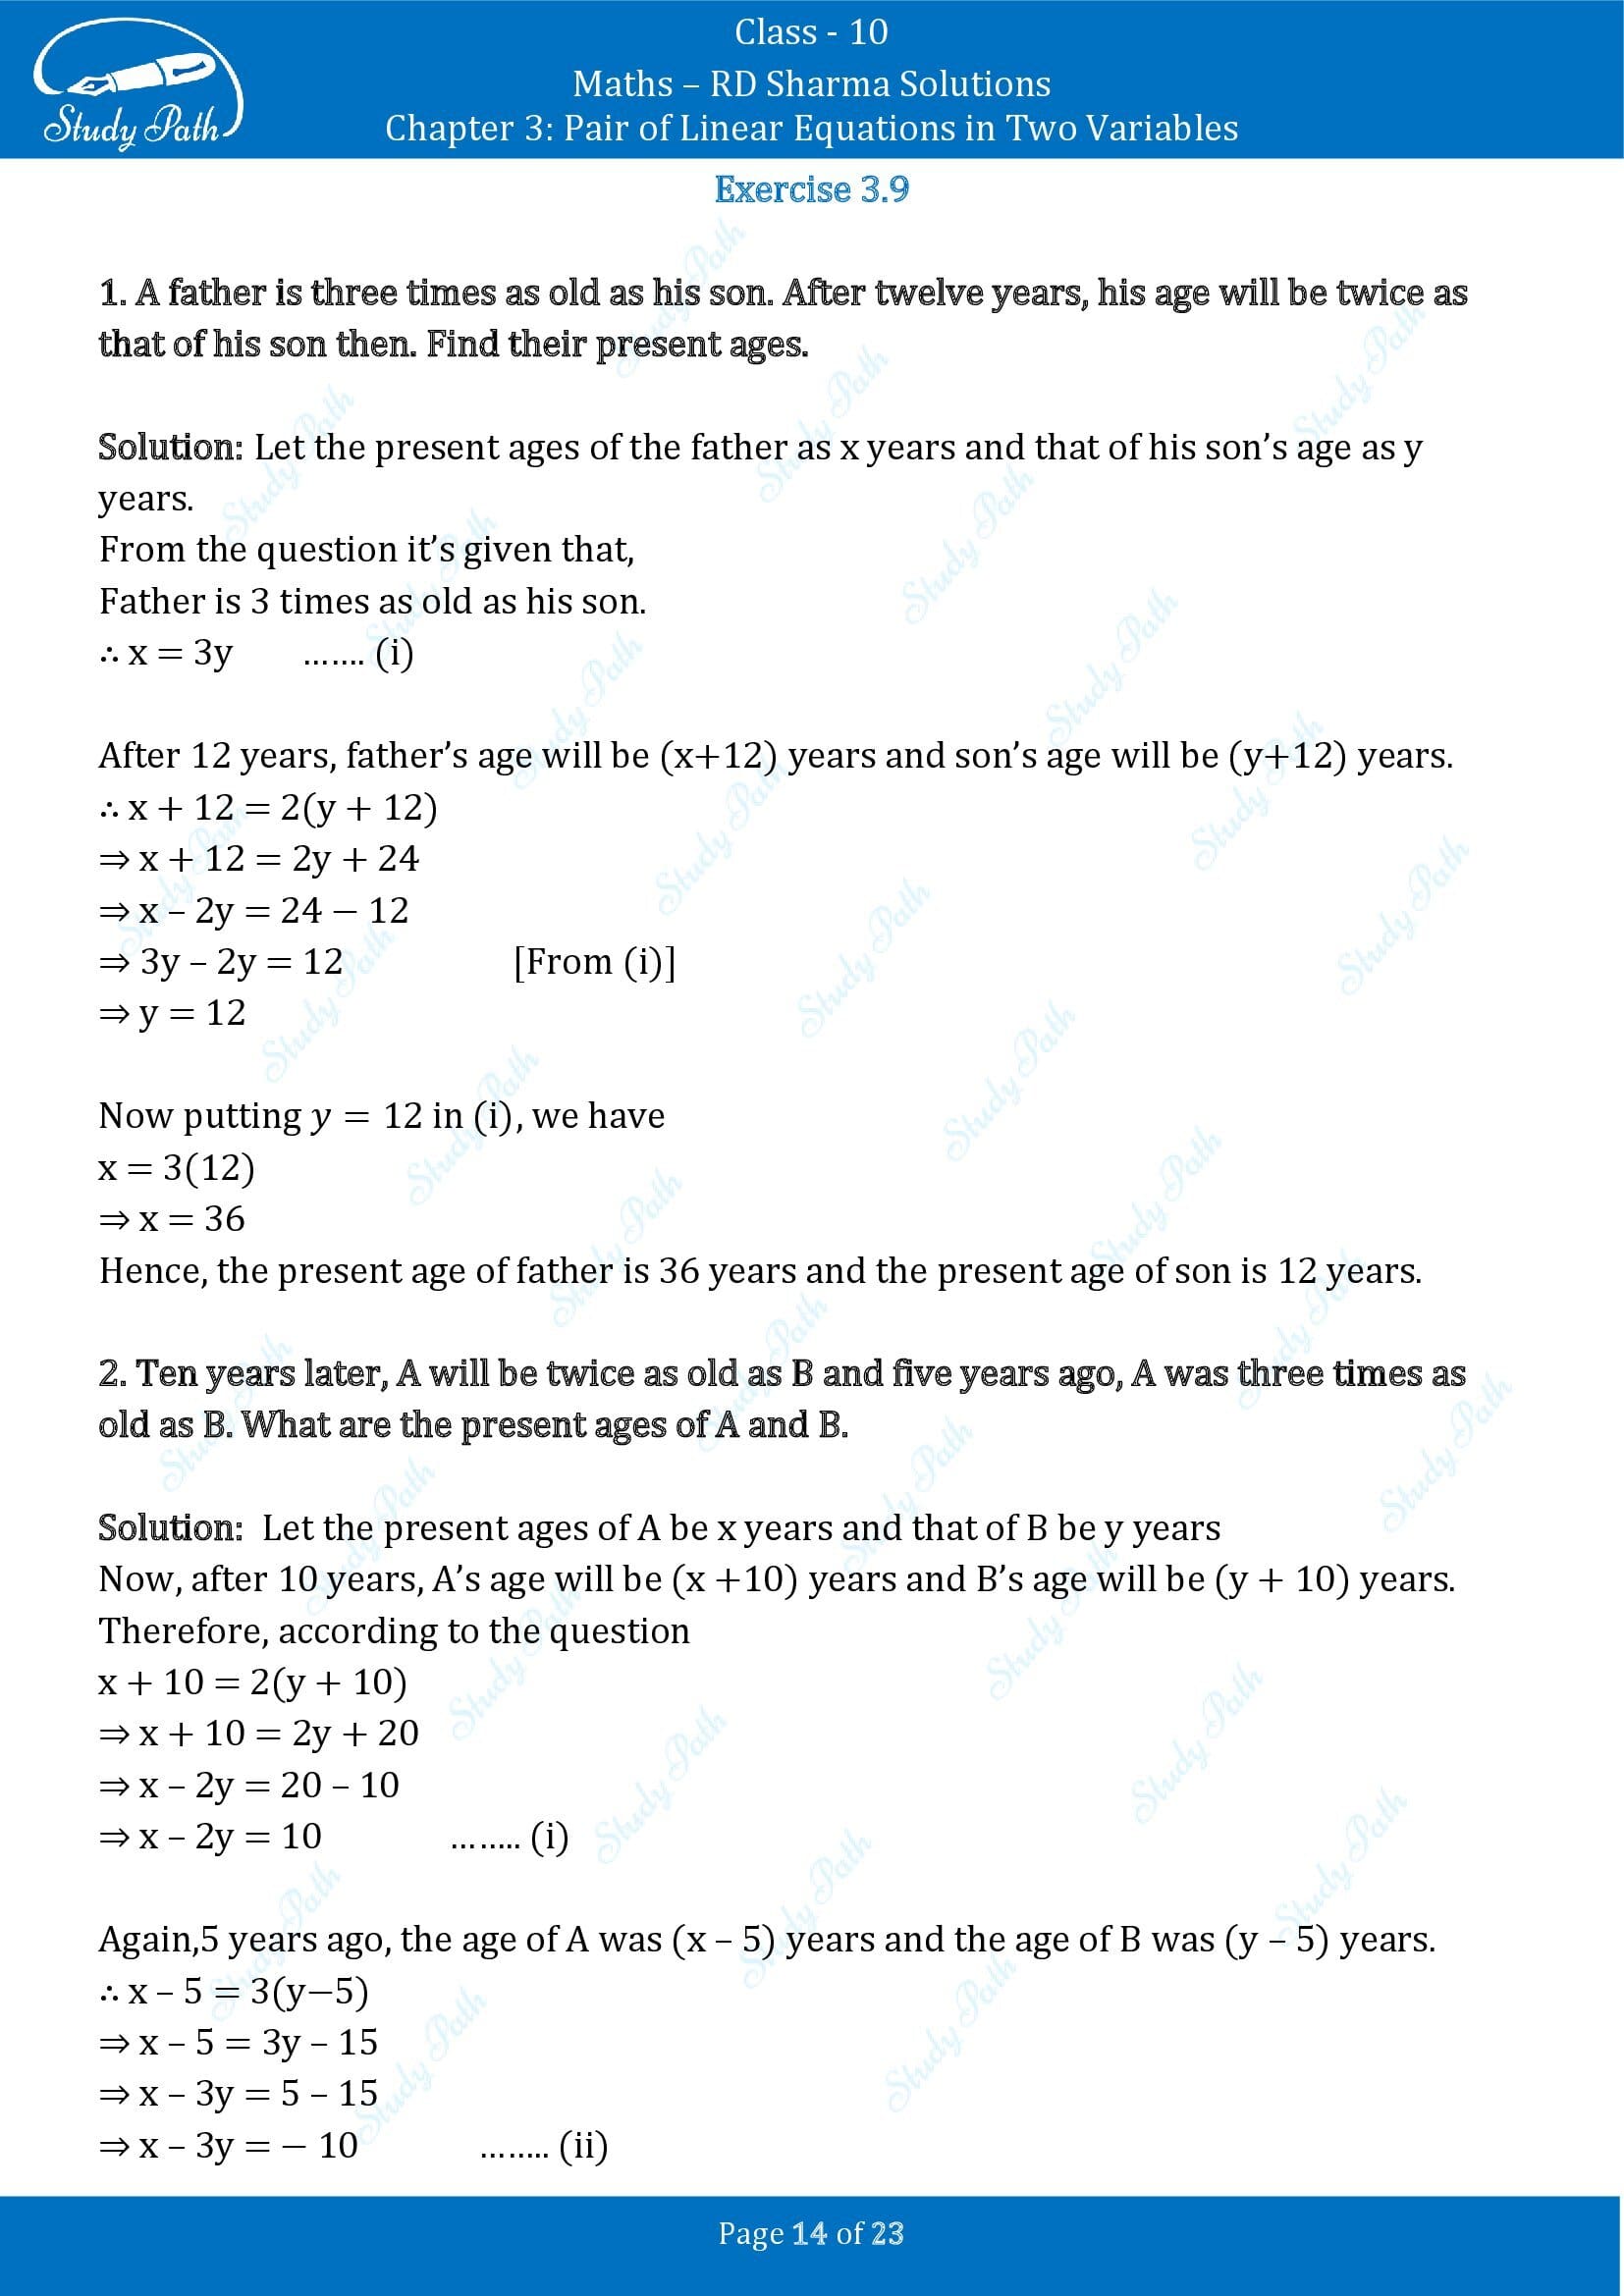 RD Sharma Solutions Class 10 Chapter 3 Pair of Linear Equations in Two Variables Exercise 3.8 00014